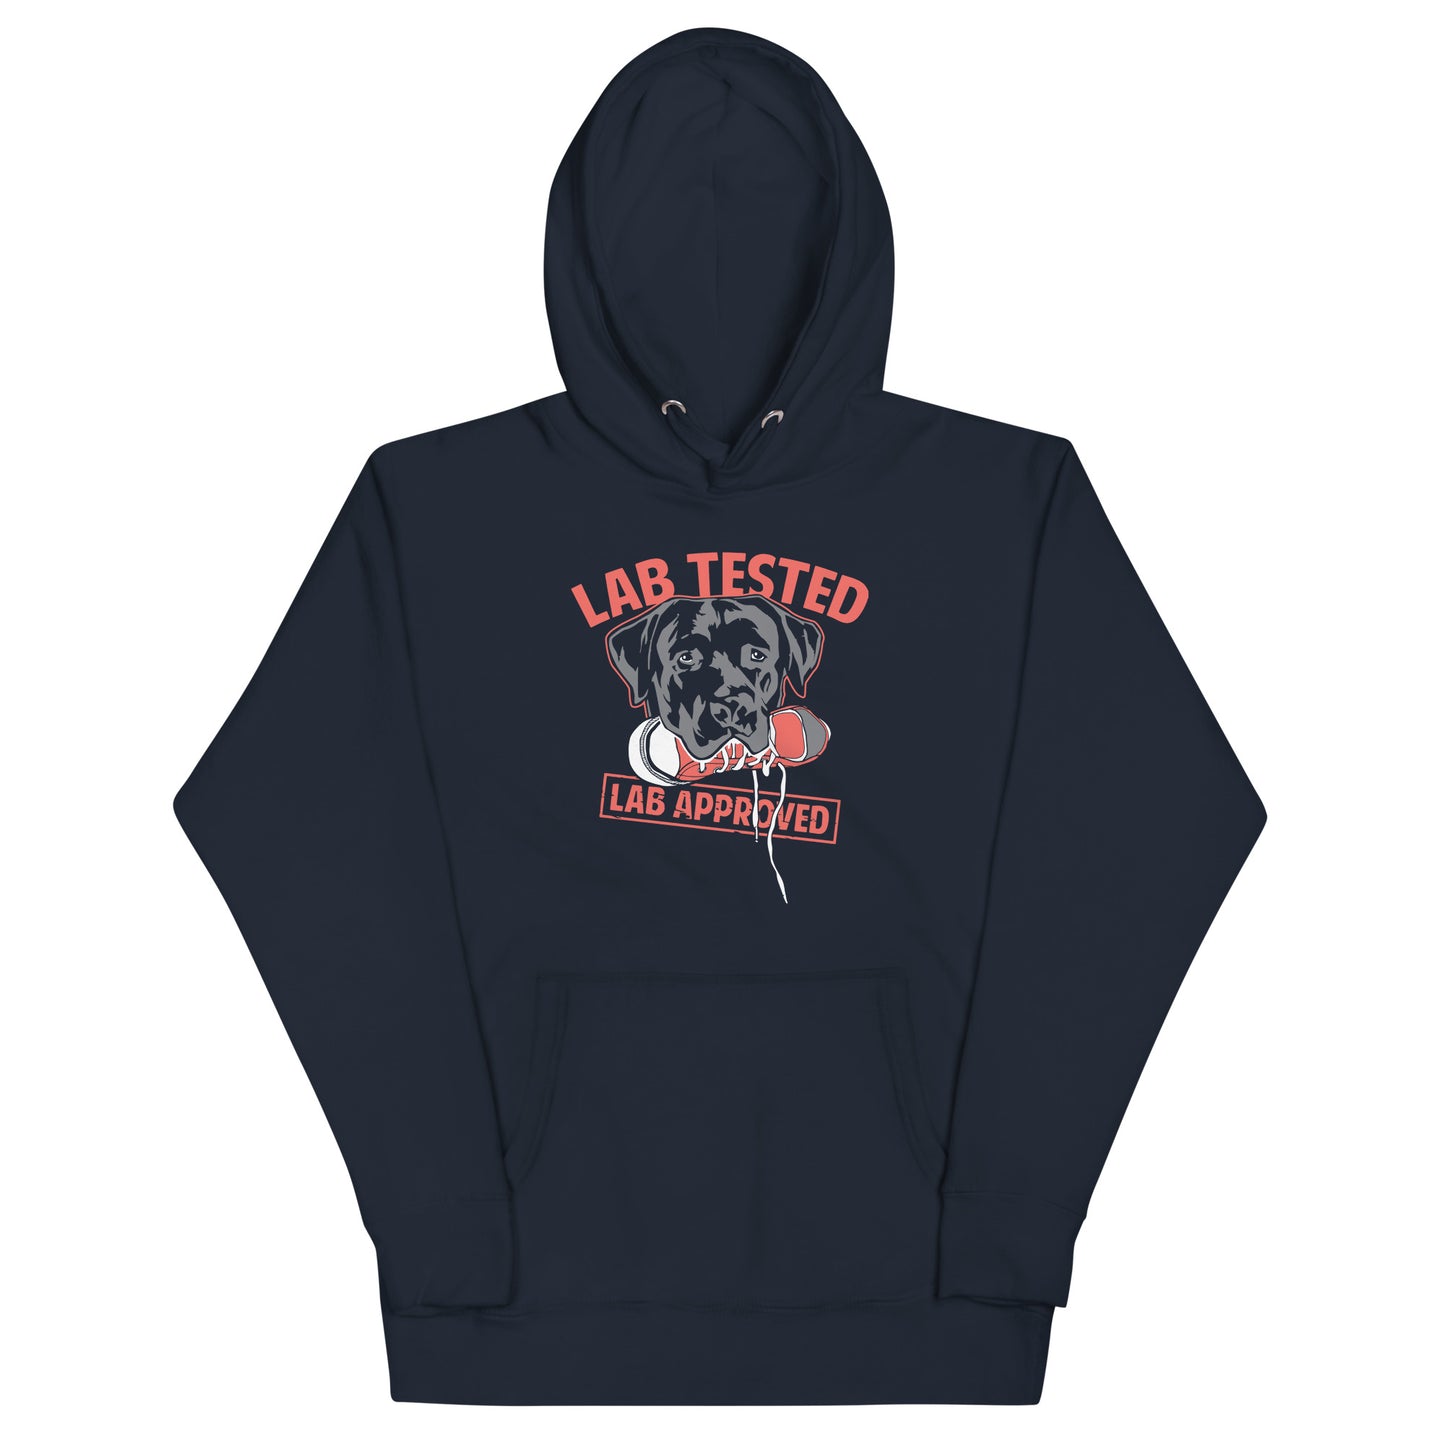 Lab Tested, Lab Approved Unisex Hoodie